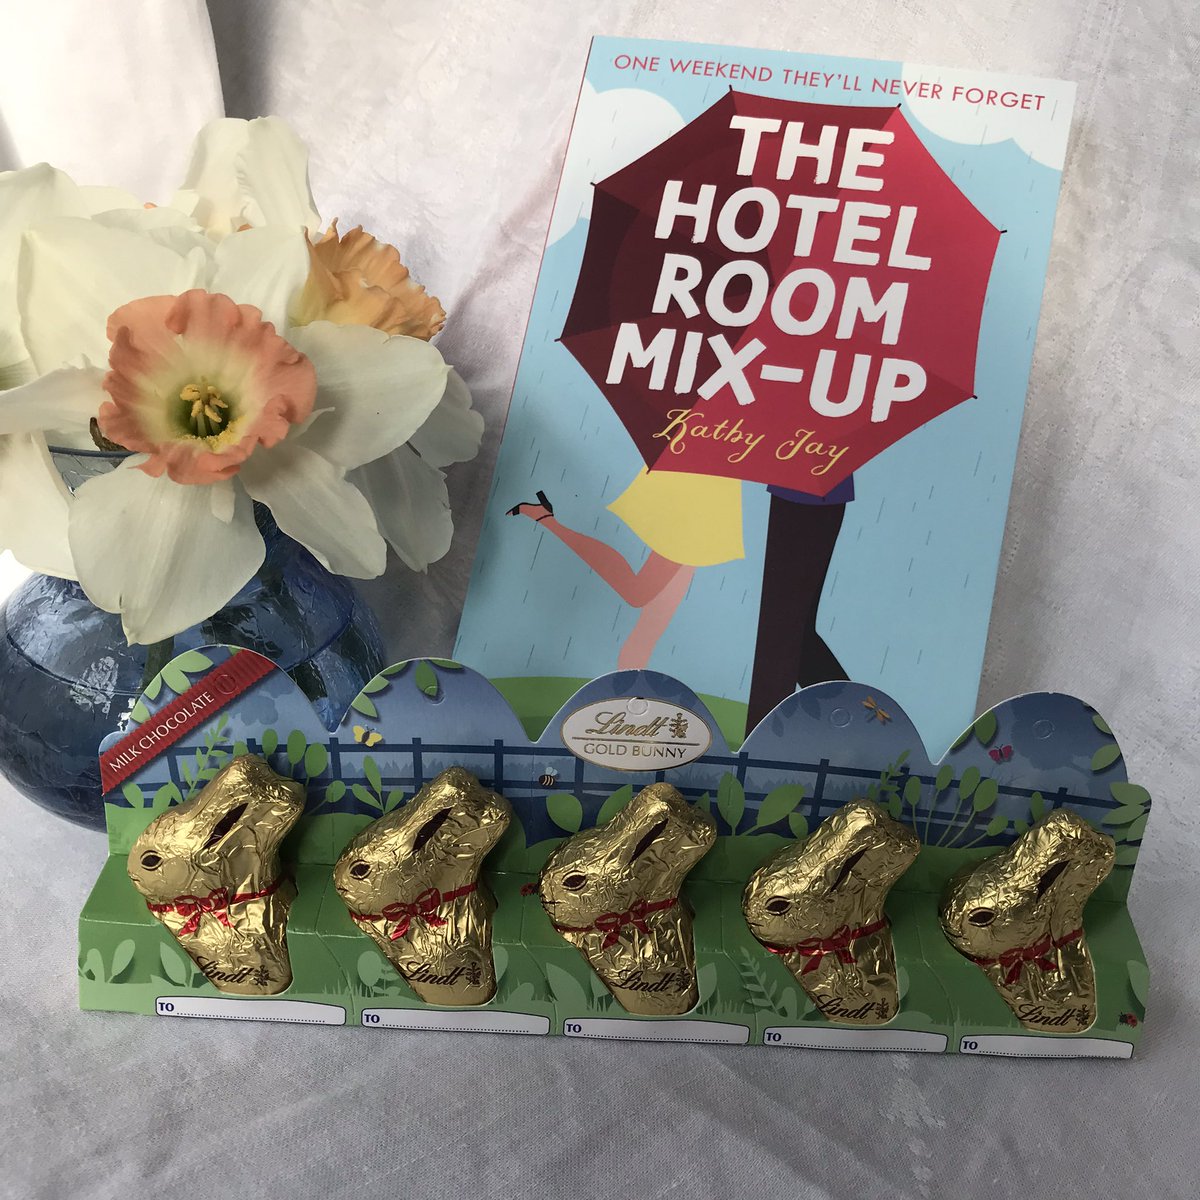 🌼Easter Giveaway🌼 For a chance to win a paperback copy of The Hotel Room Mix-Up and five teeny milk chocolate bunnies, just: LIKE and RETWEET Ends 24/3/24 at midnight UK time. UK and Ireland only - sorry everywhere else! #romancebooks #romancenovels #romancereaders #giveaway